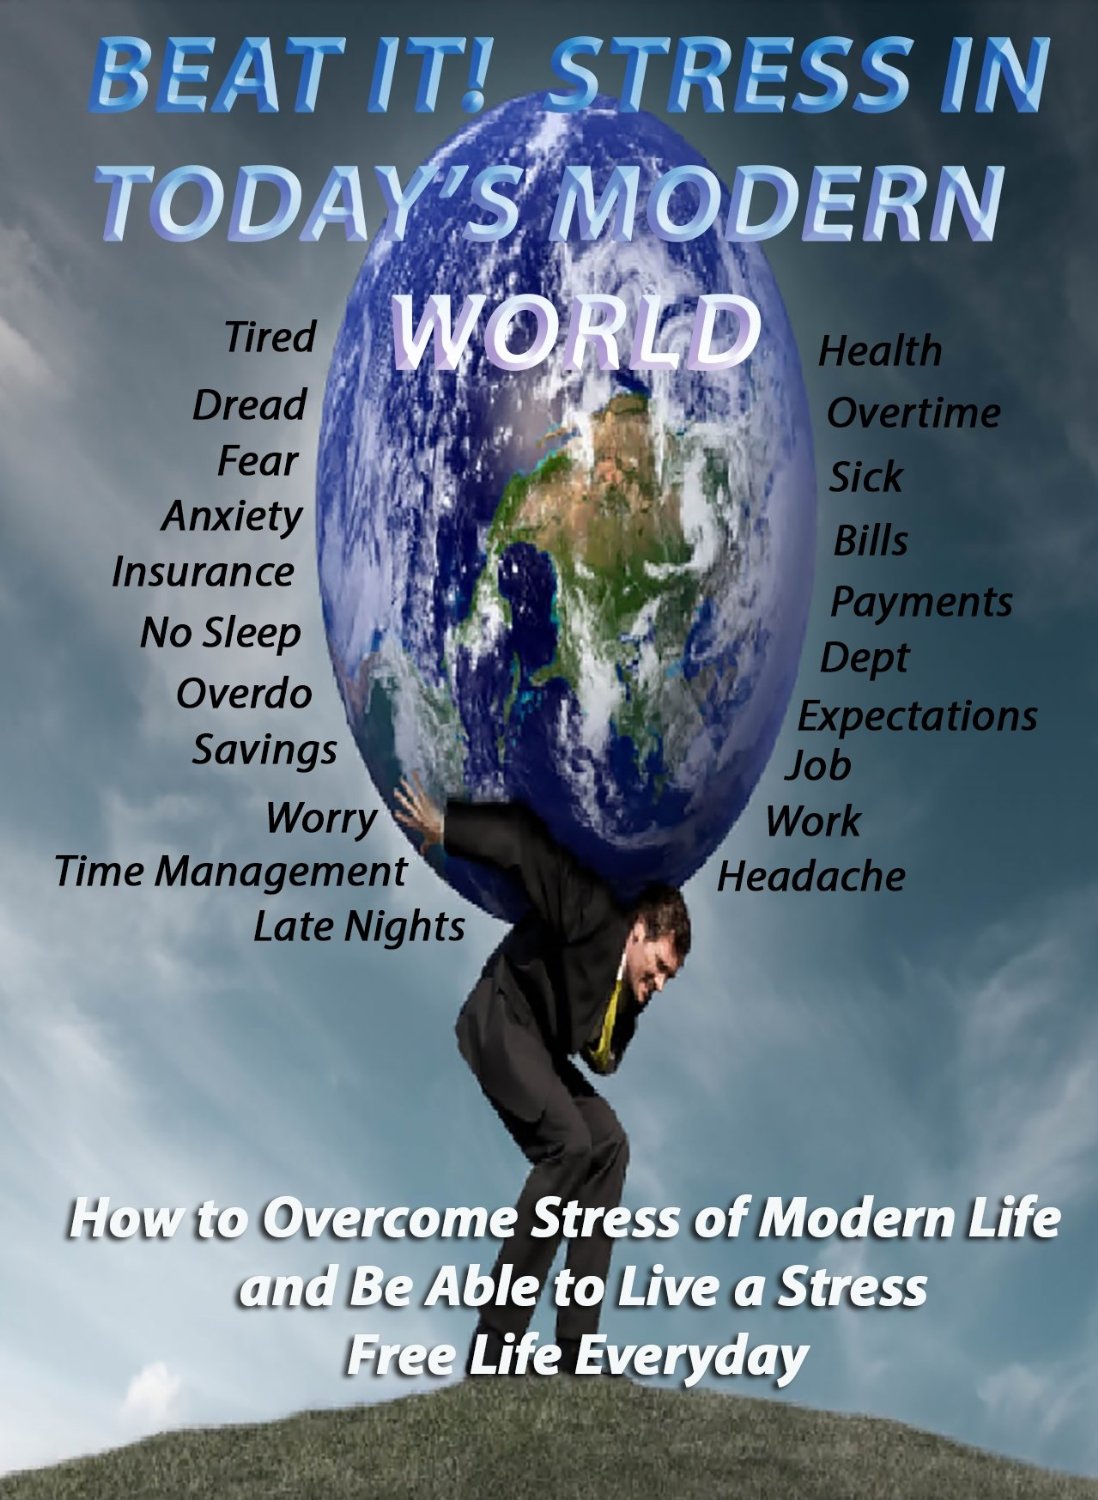 Beat It! Stress in Today’s Modern World – How to Overcome Stress of Modern Life and Be Able to Live a Stress Free Life by Fran KF